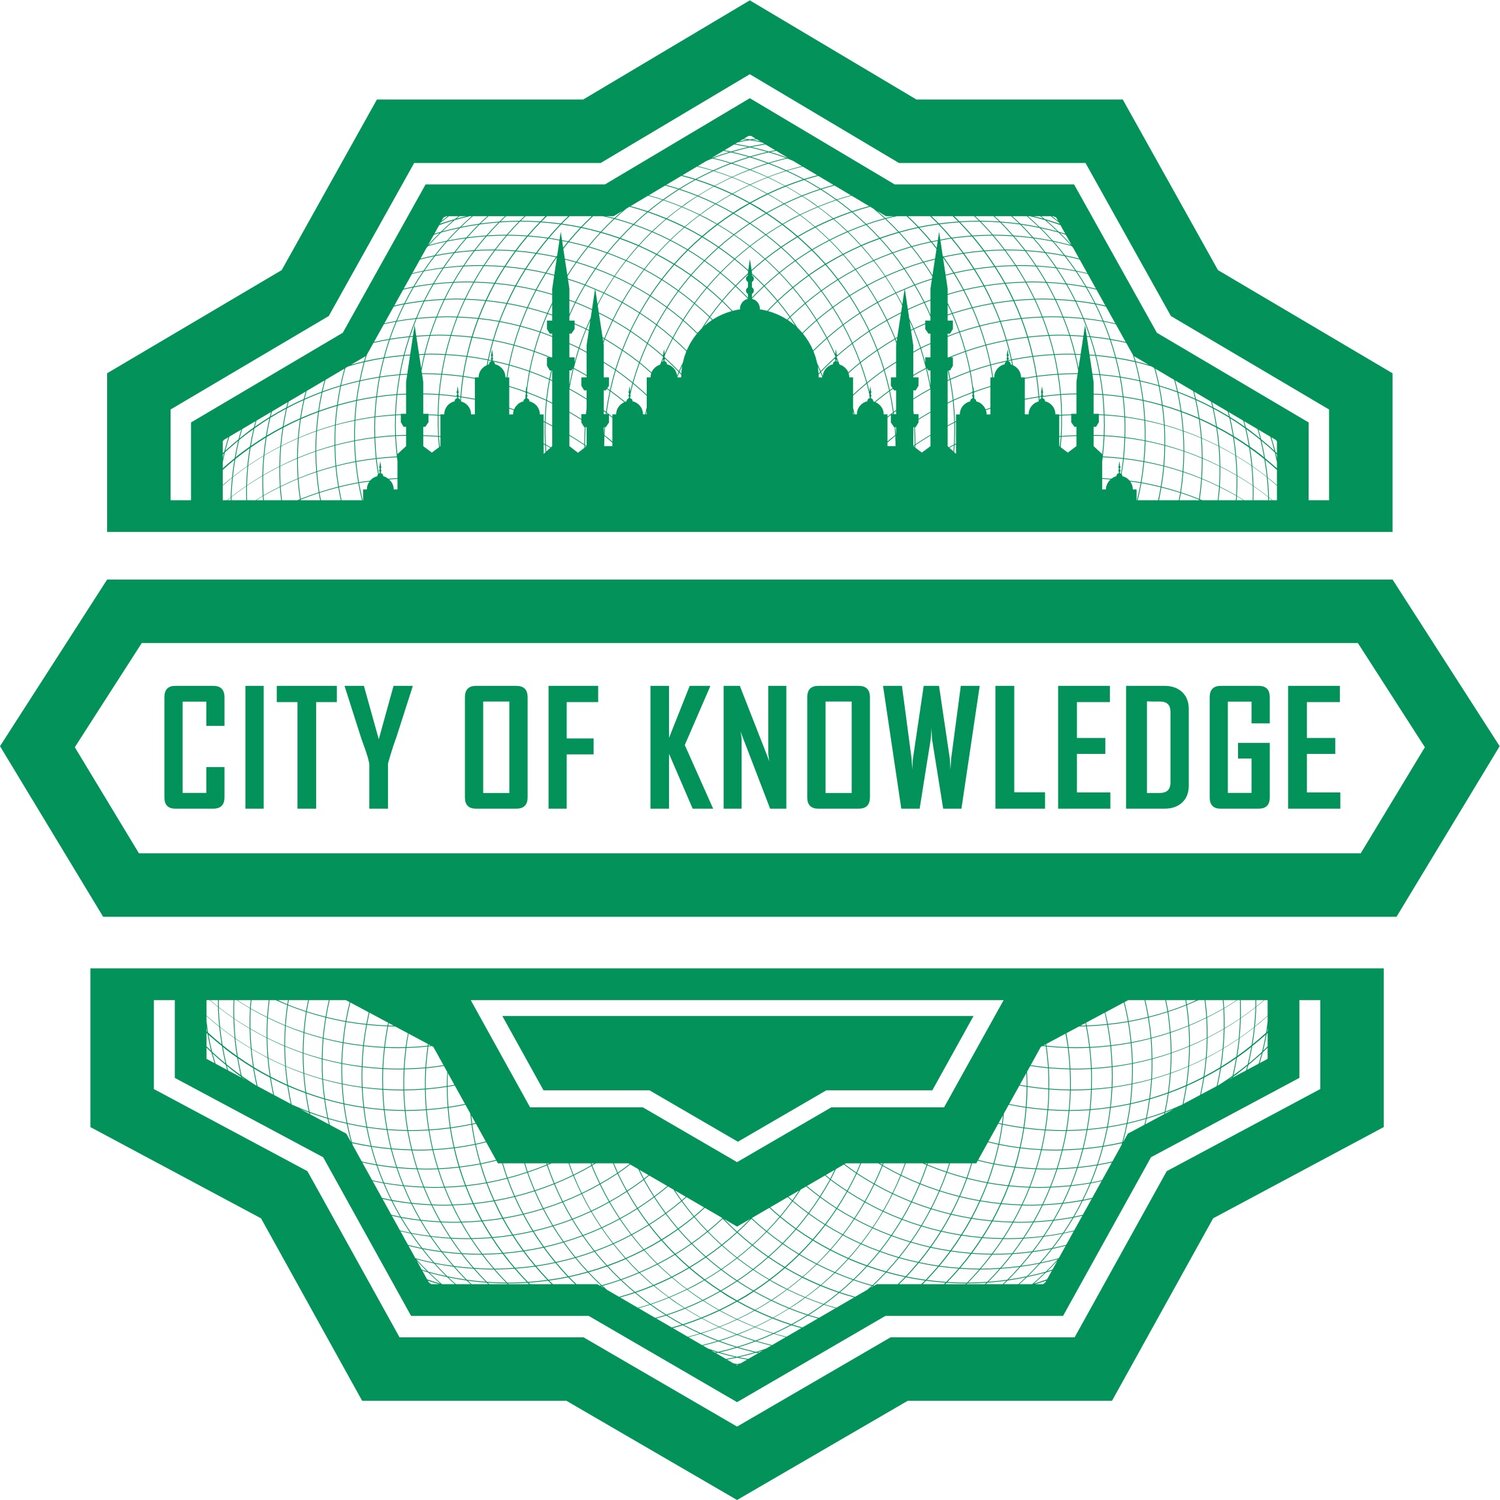 City of Knowledge